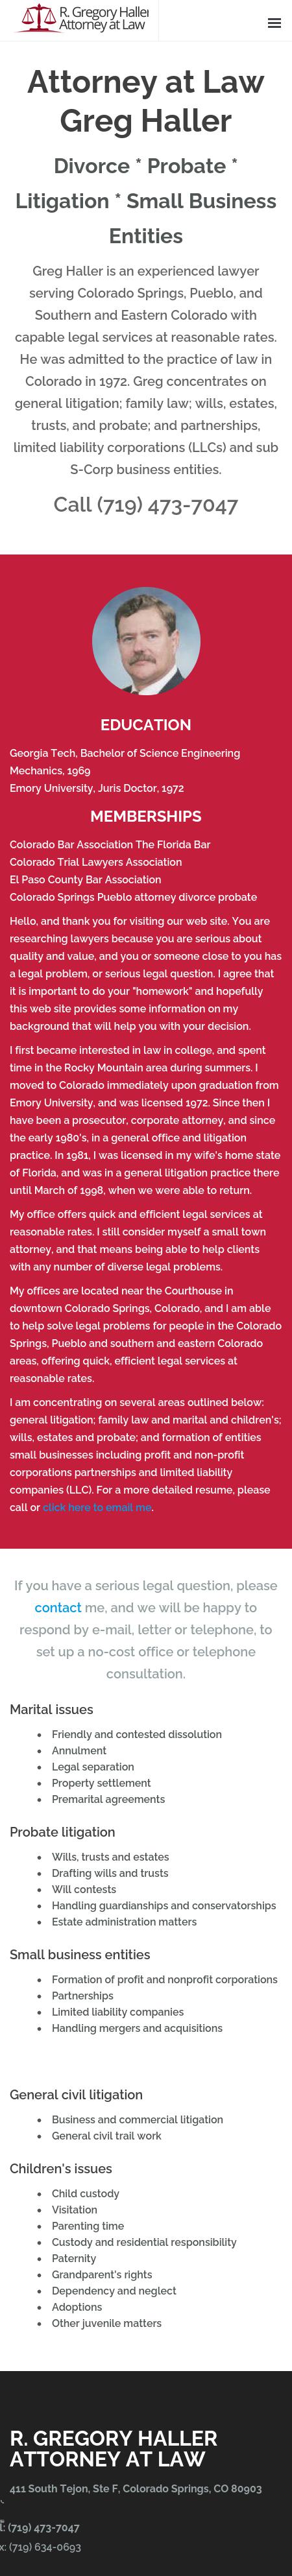 Haller Greg Attorney At Law - Colorado Springs CO Lawyers